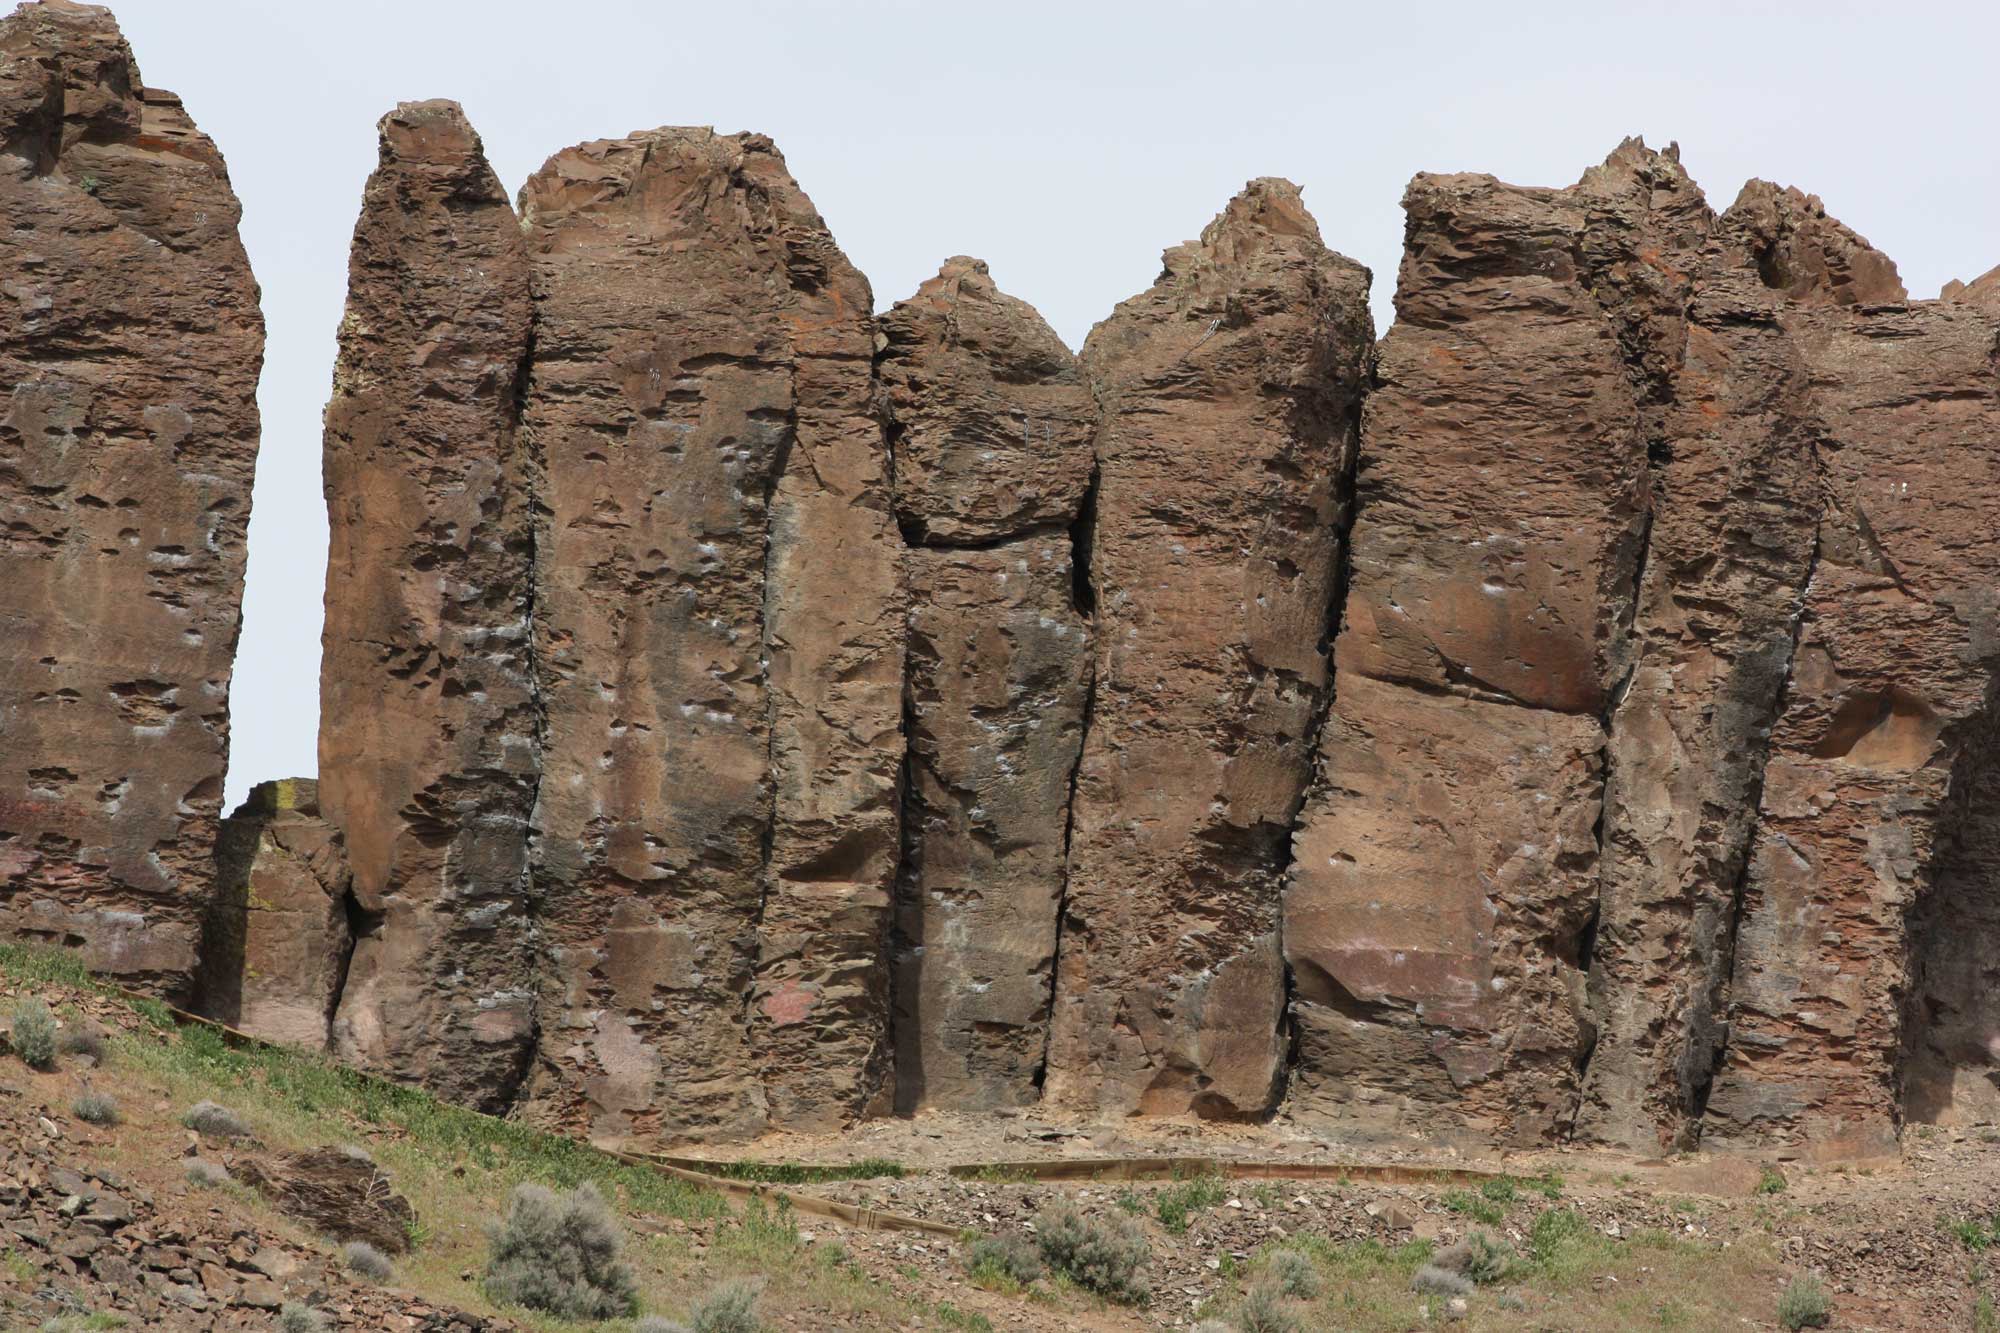 Photograph of cliffs formed by Columbia River flood basalts on French Coulee in Washington. The cliffs are brown in color and stand vertically. The surface of the cliffs is pitted.